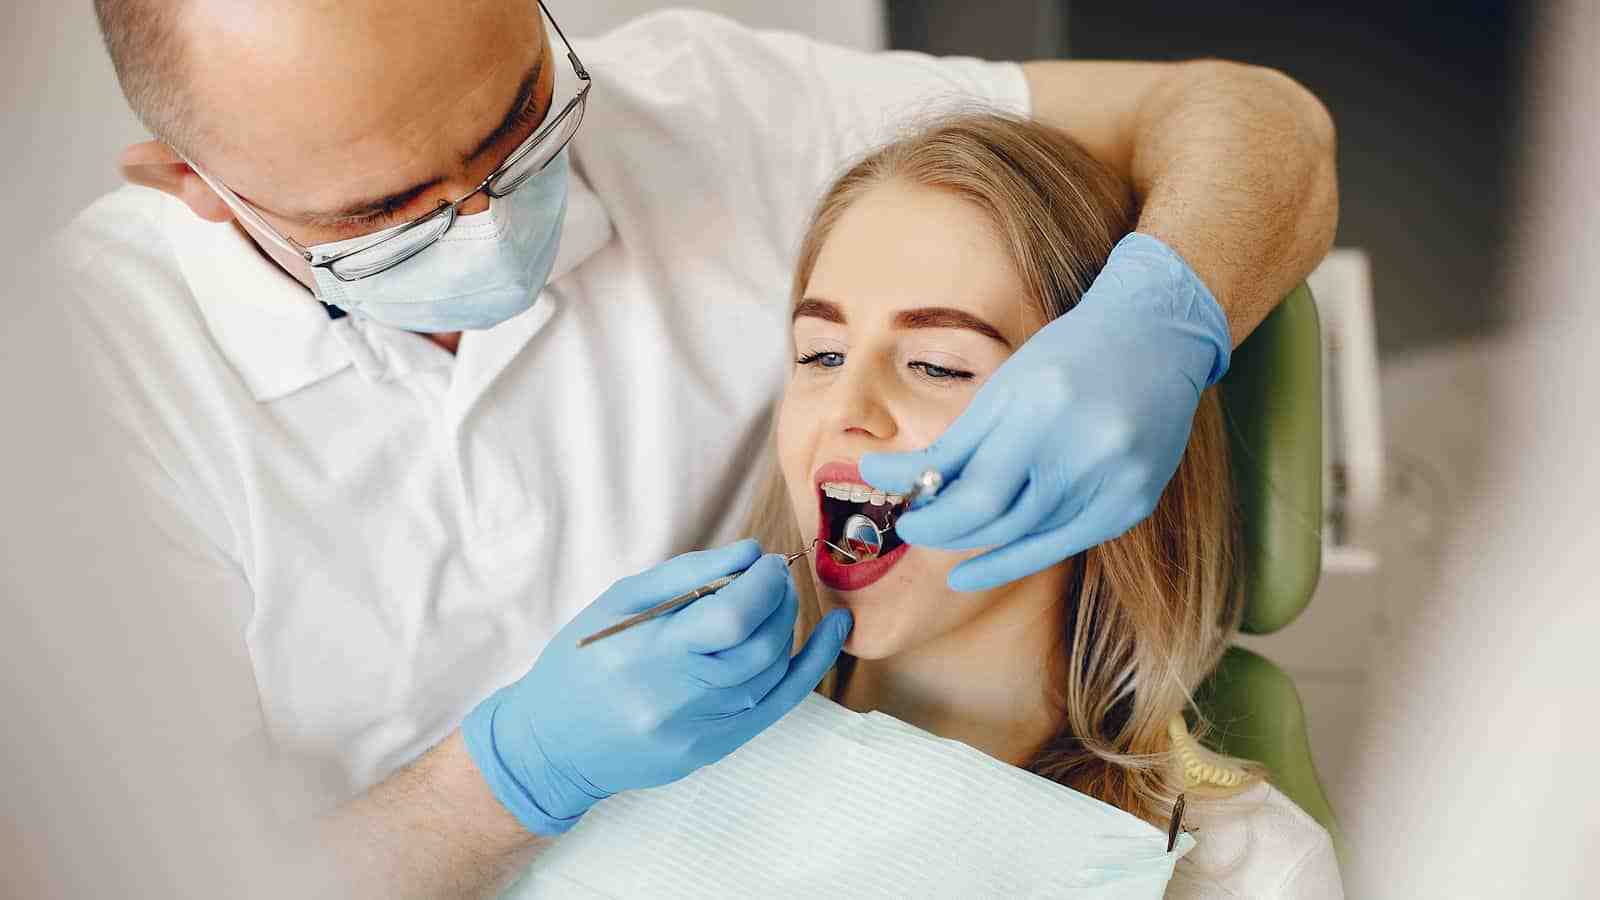 Can I ring 111 for toothache?